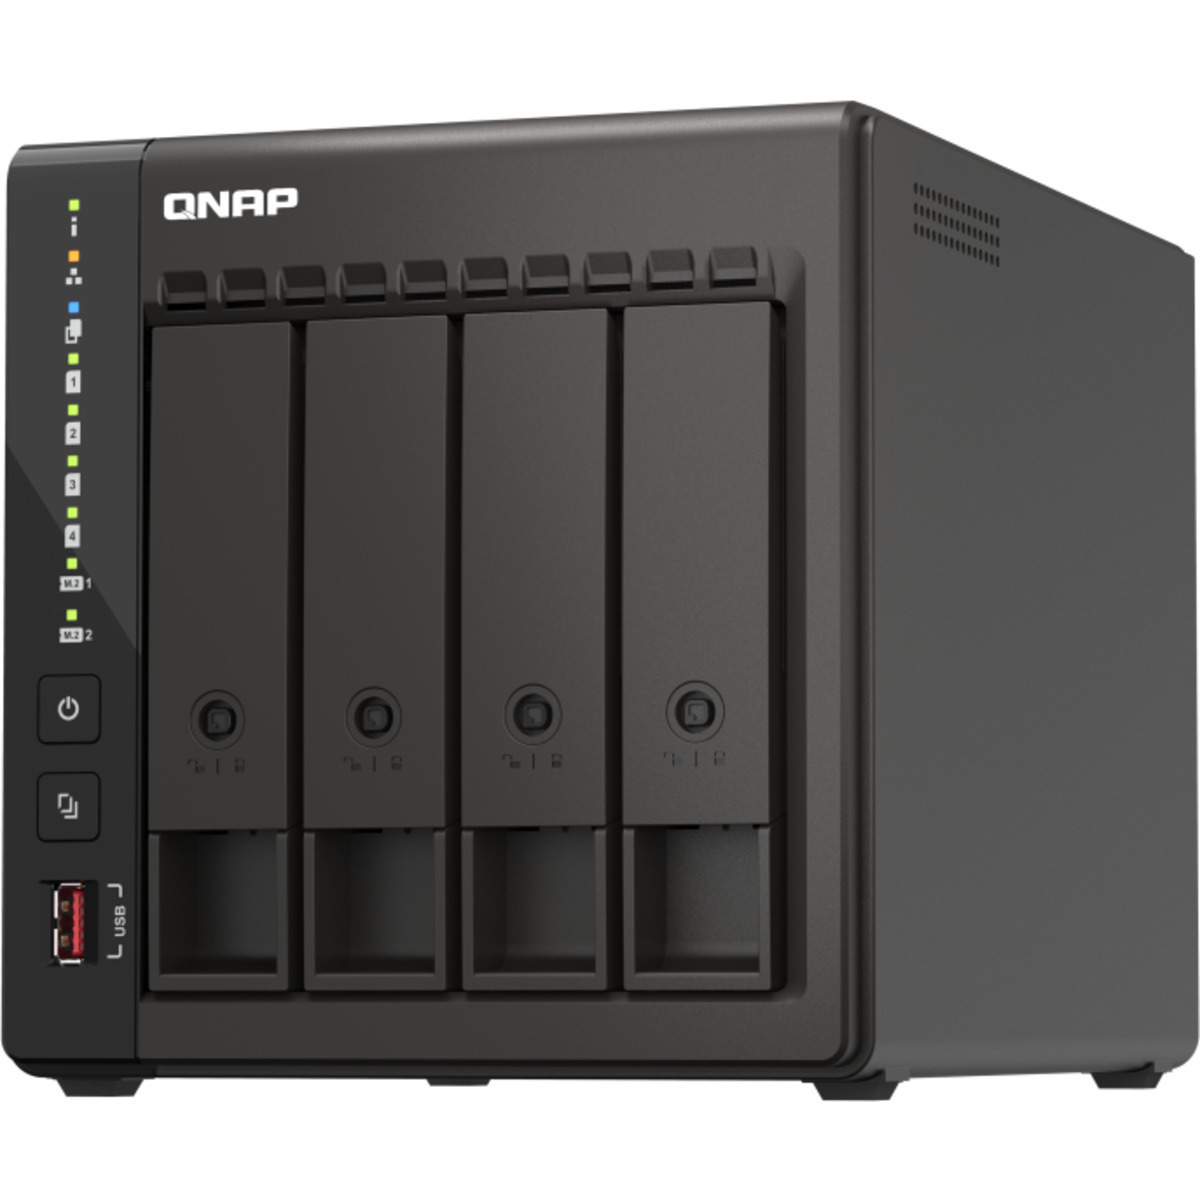 buy QNAP TS-453E Desktop NAS - Network Attached Storage Device Burn-In Tested Configurations - nas headquarters buy network attached storage server device das new raid-5 free shipping usa TS-453E